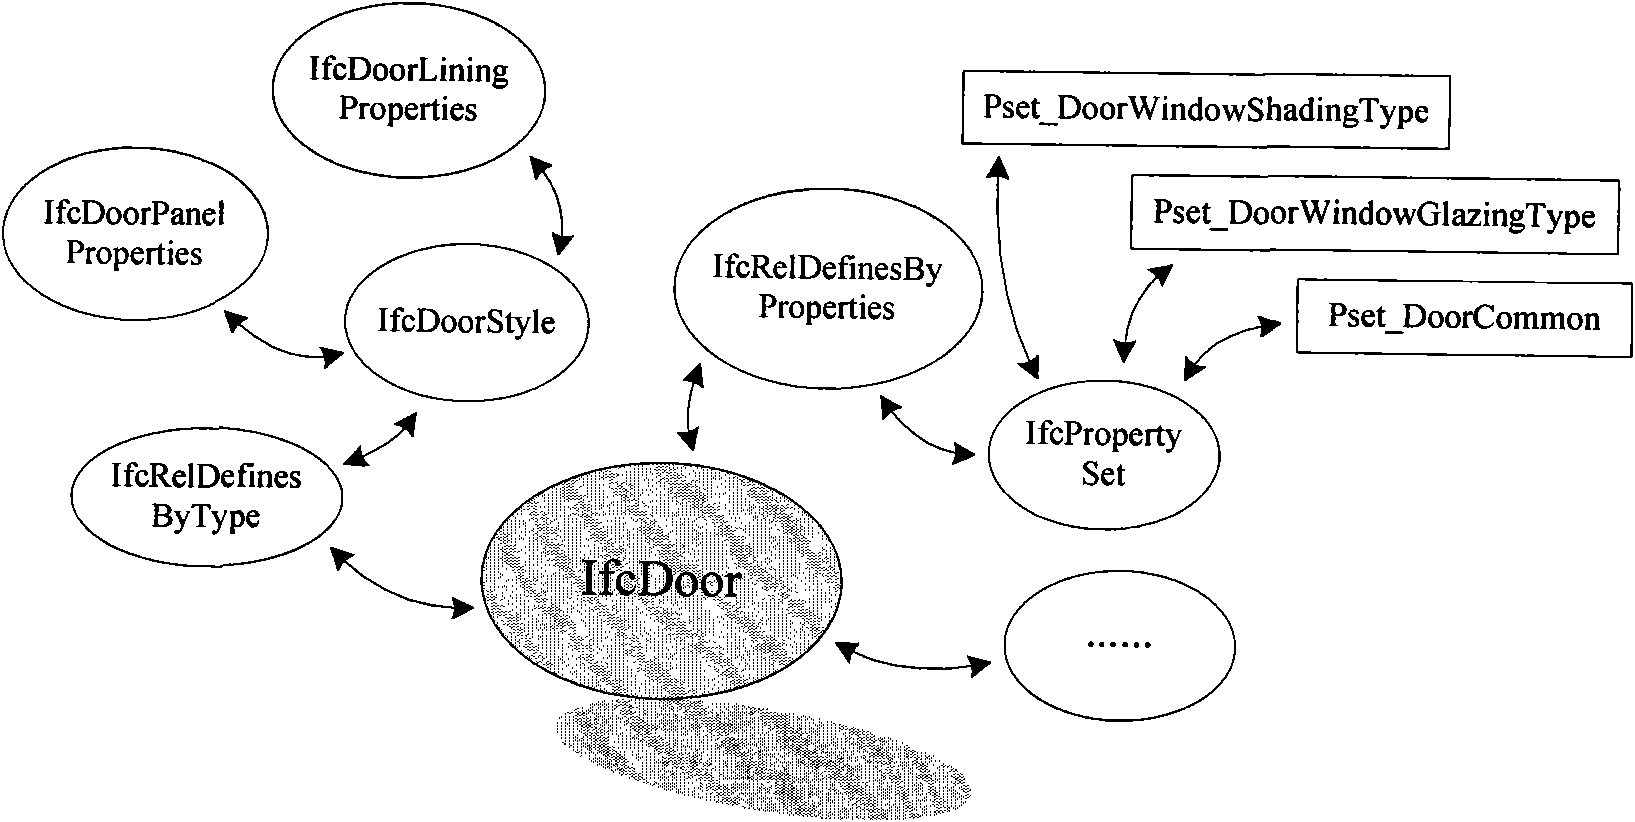 Engine device and method for data integration and exchange of building information mode based on IFC (industry foundation classes) standards